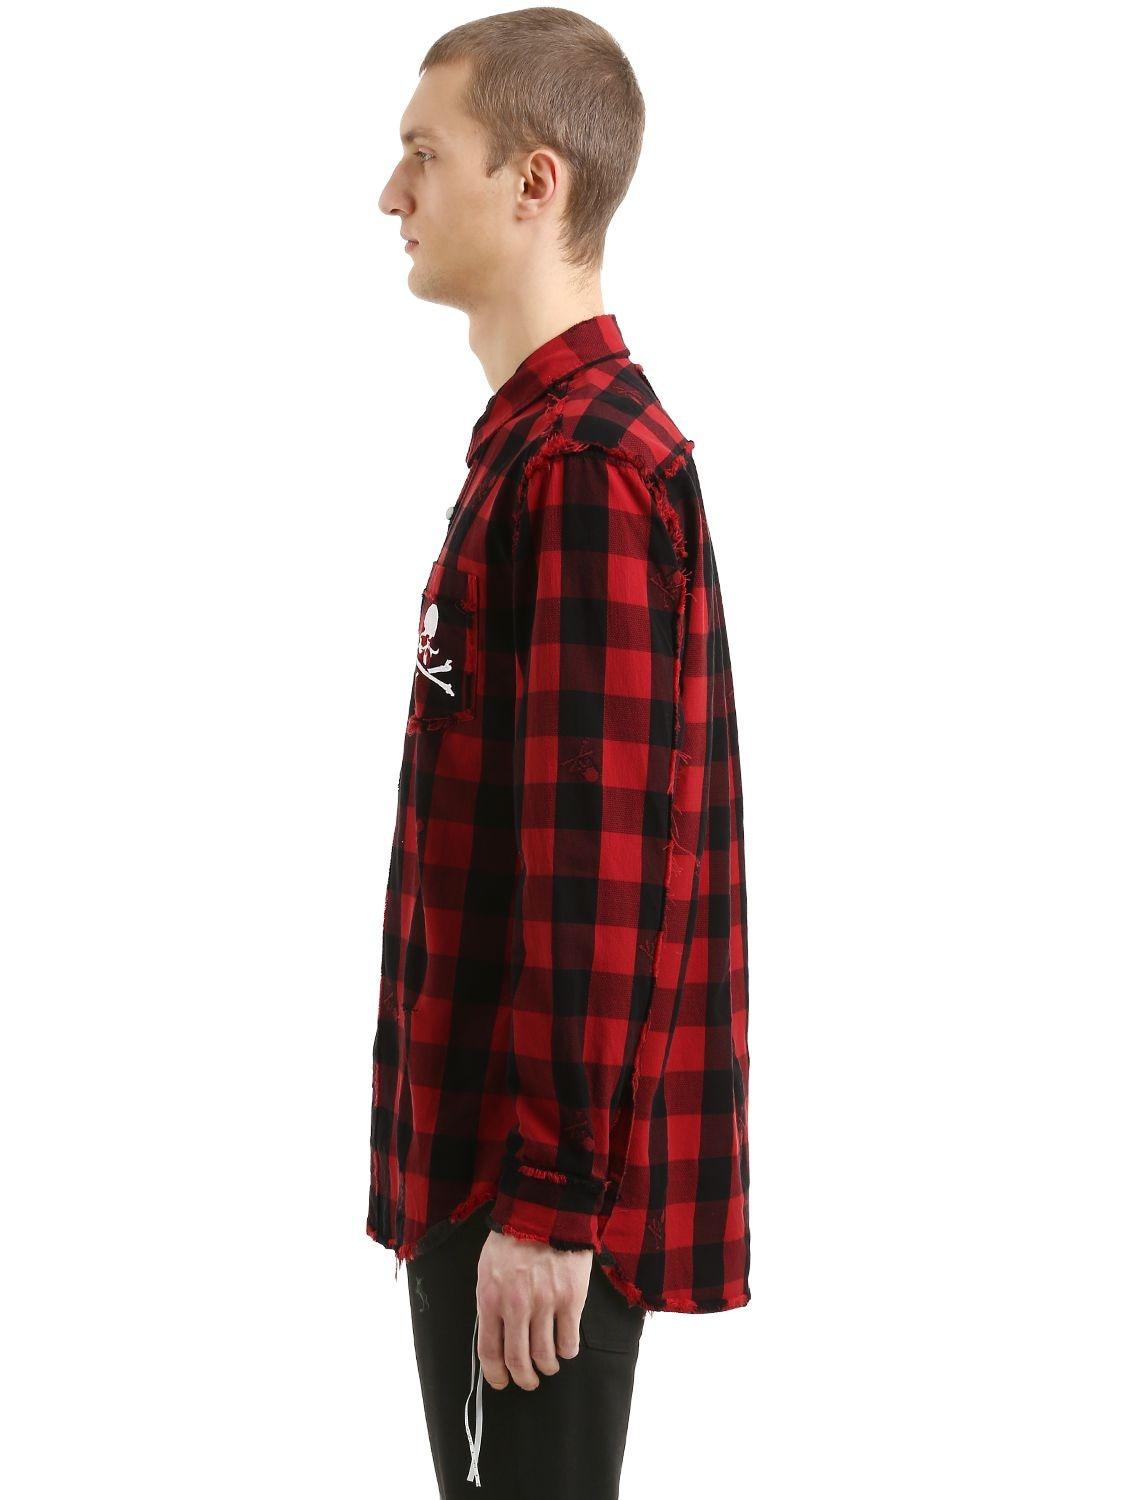 MASTERMIND WORLD Skull Checked Cotton Flannel Shirt in Red for Men